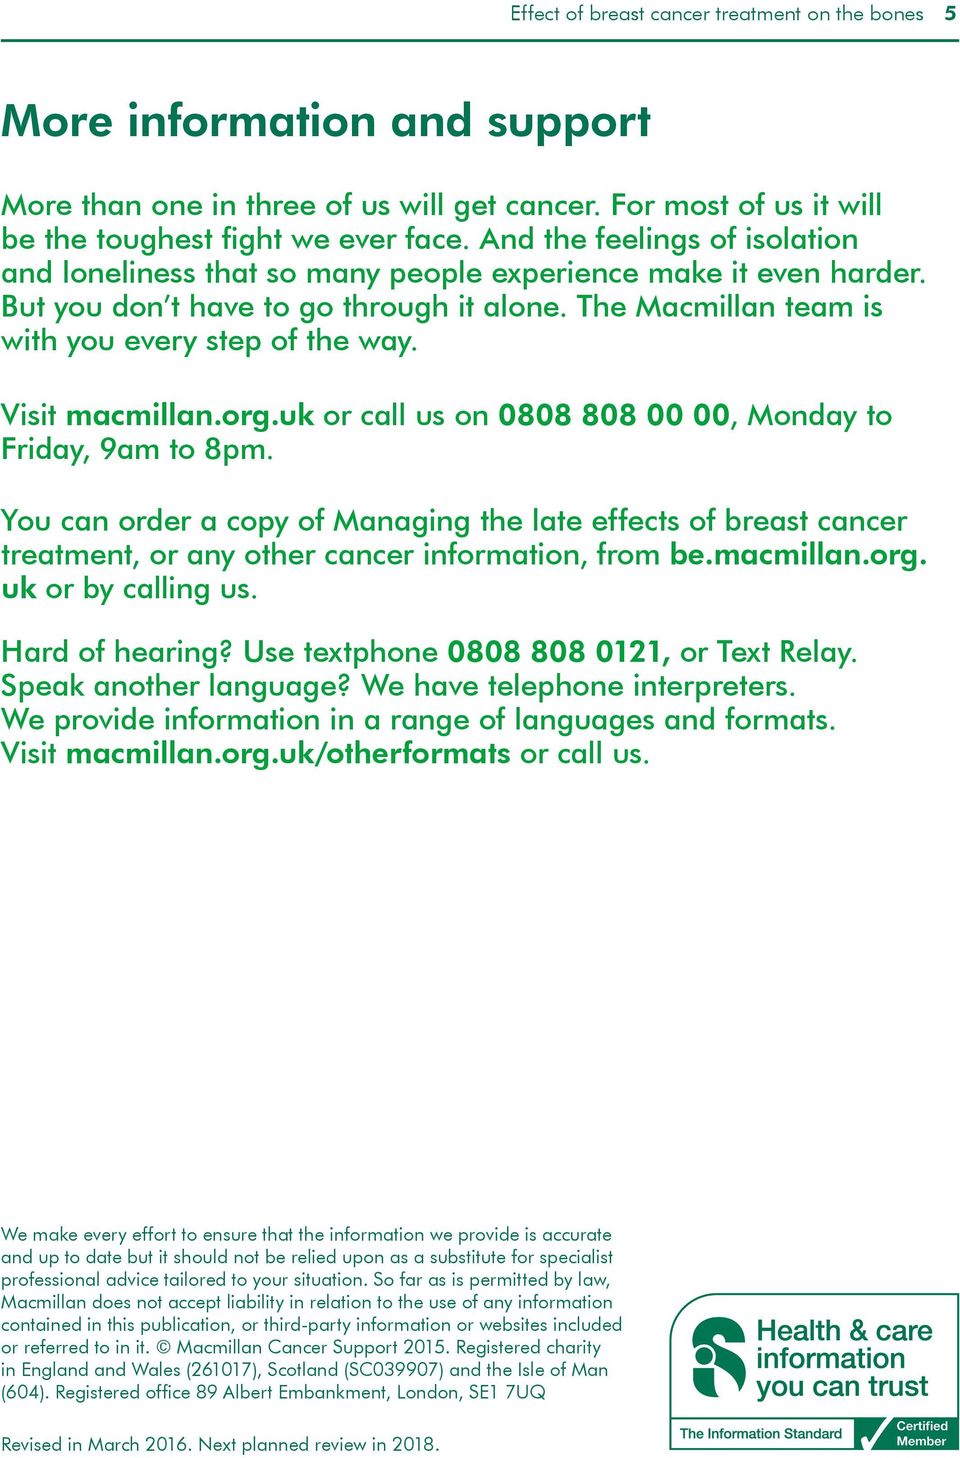 Visit macmillan.org.uk or call us on 0808 808 00 00, Monday to Friday, 9am to 8pm.